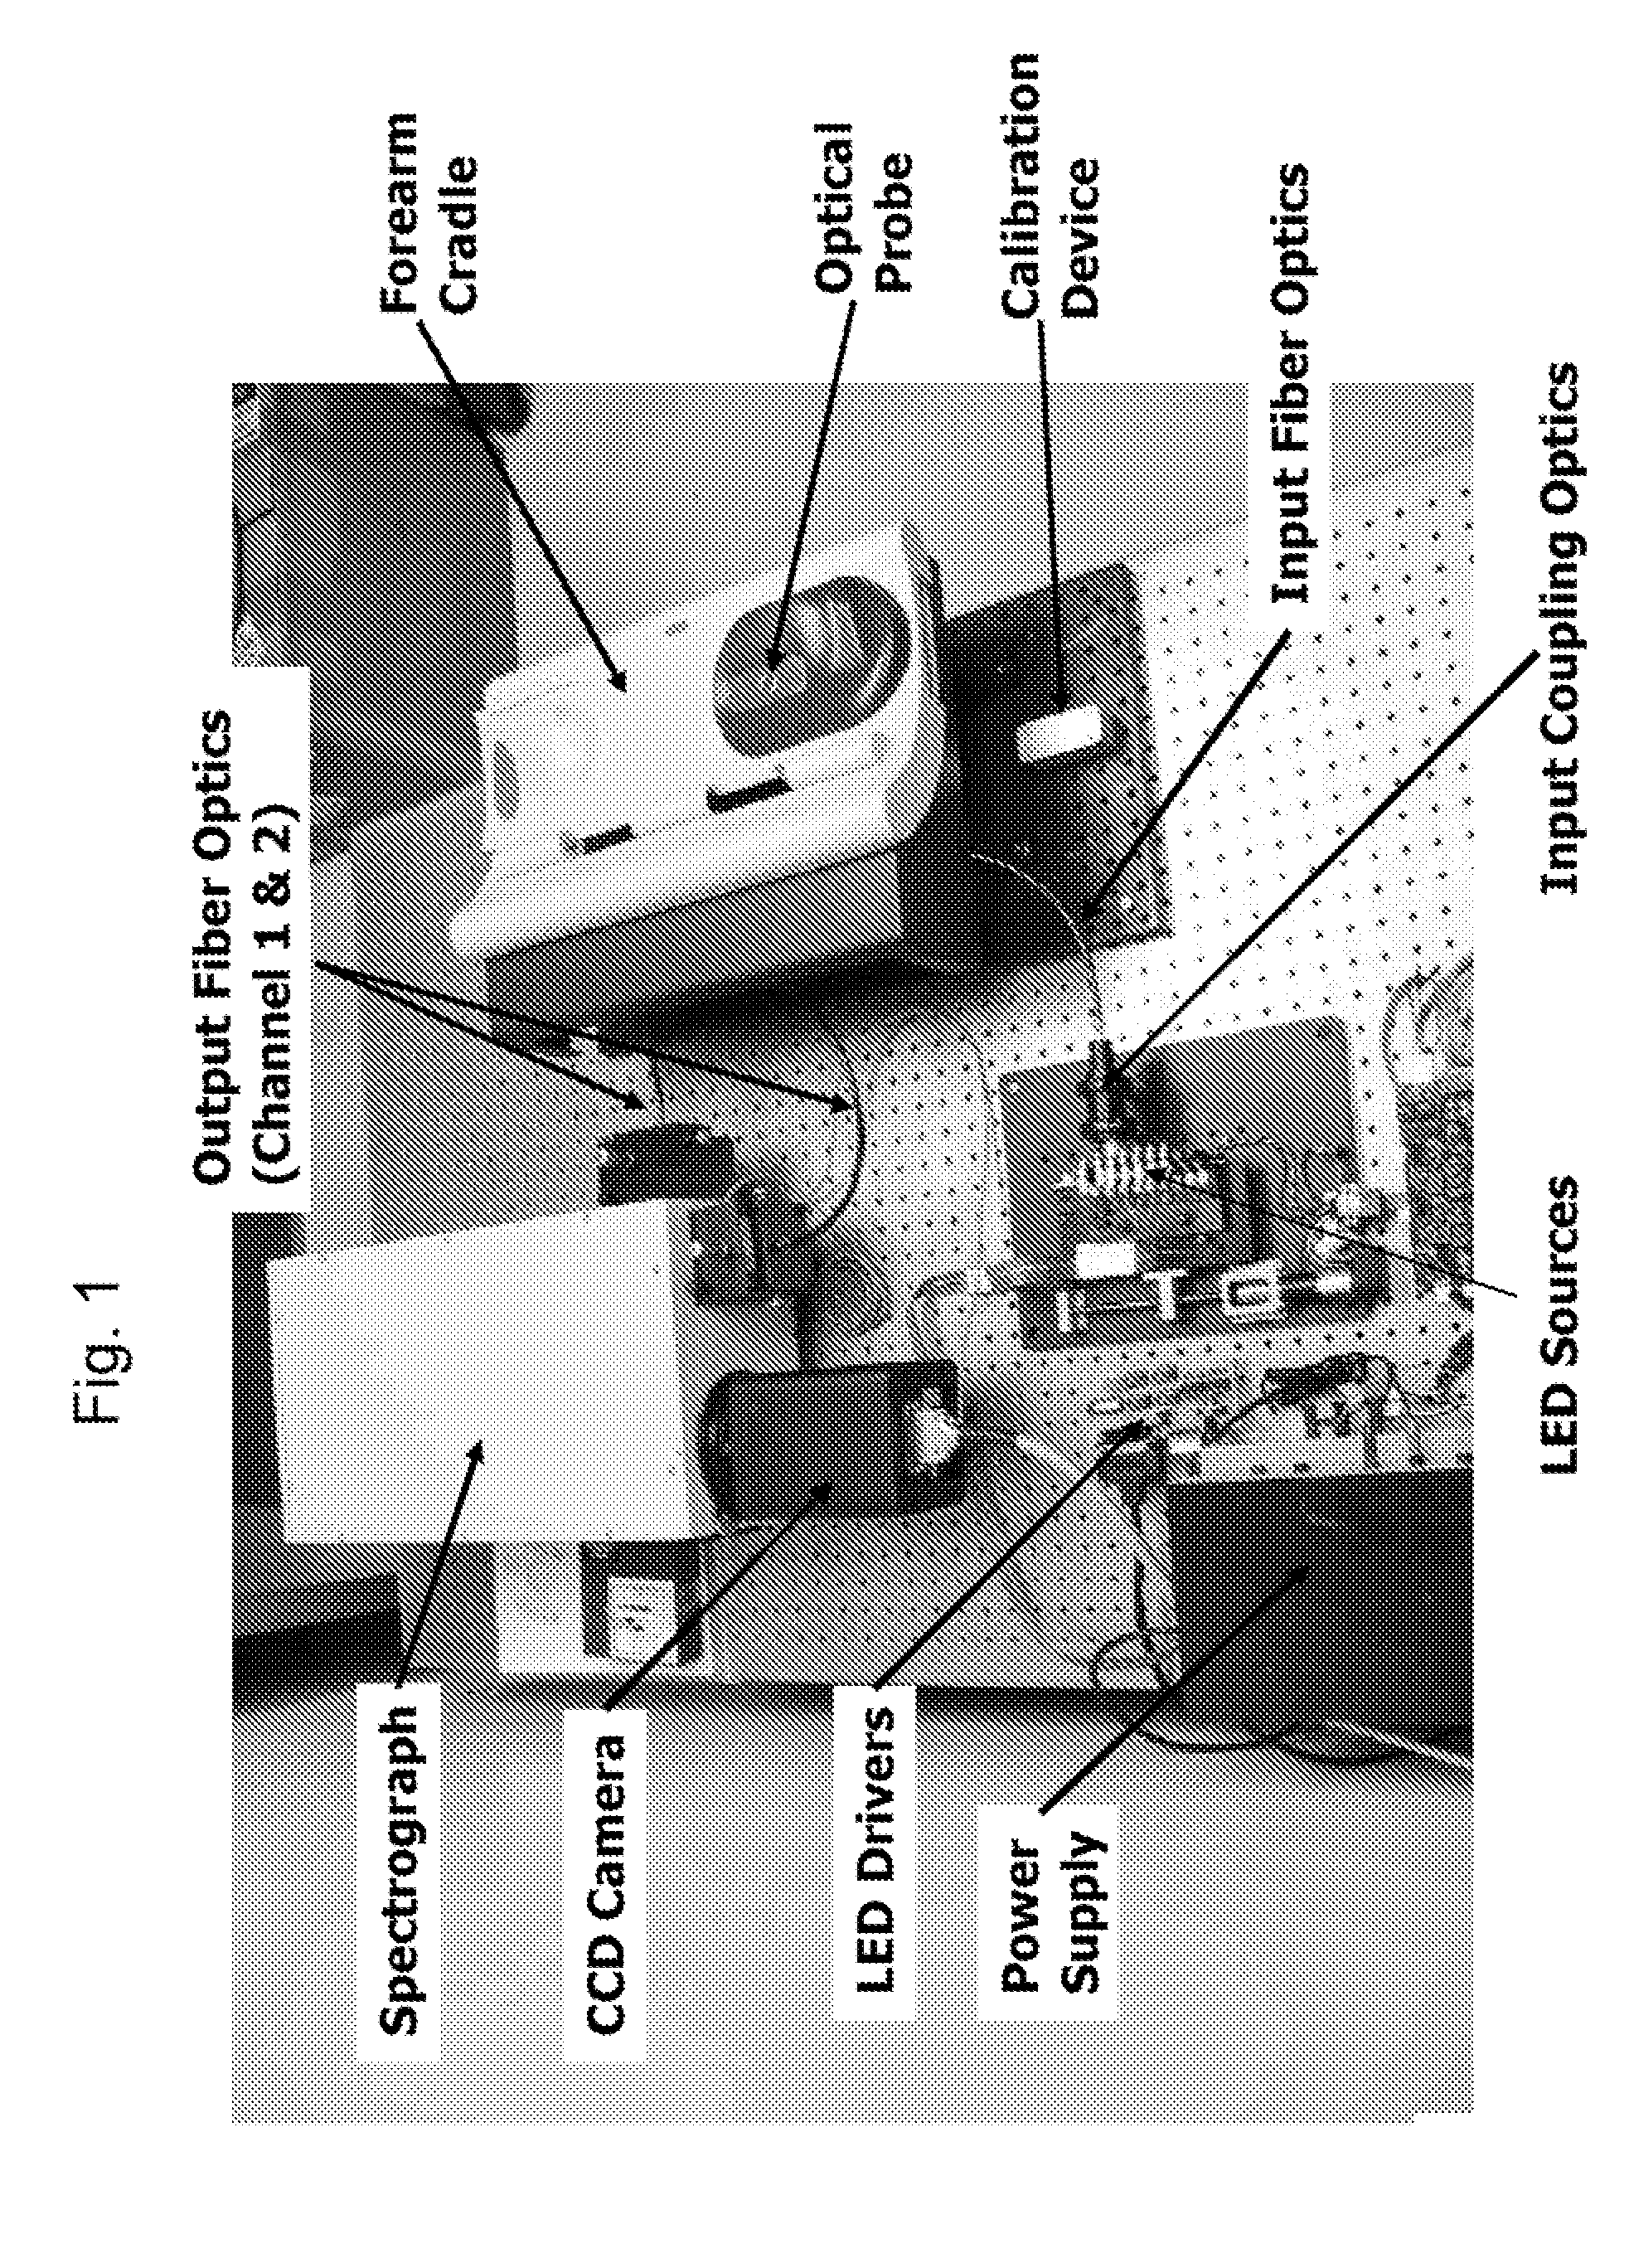 Method and apparatus to detect coronary artery calcification or disease